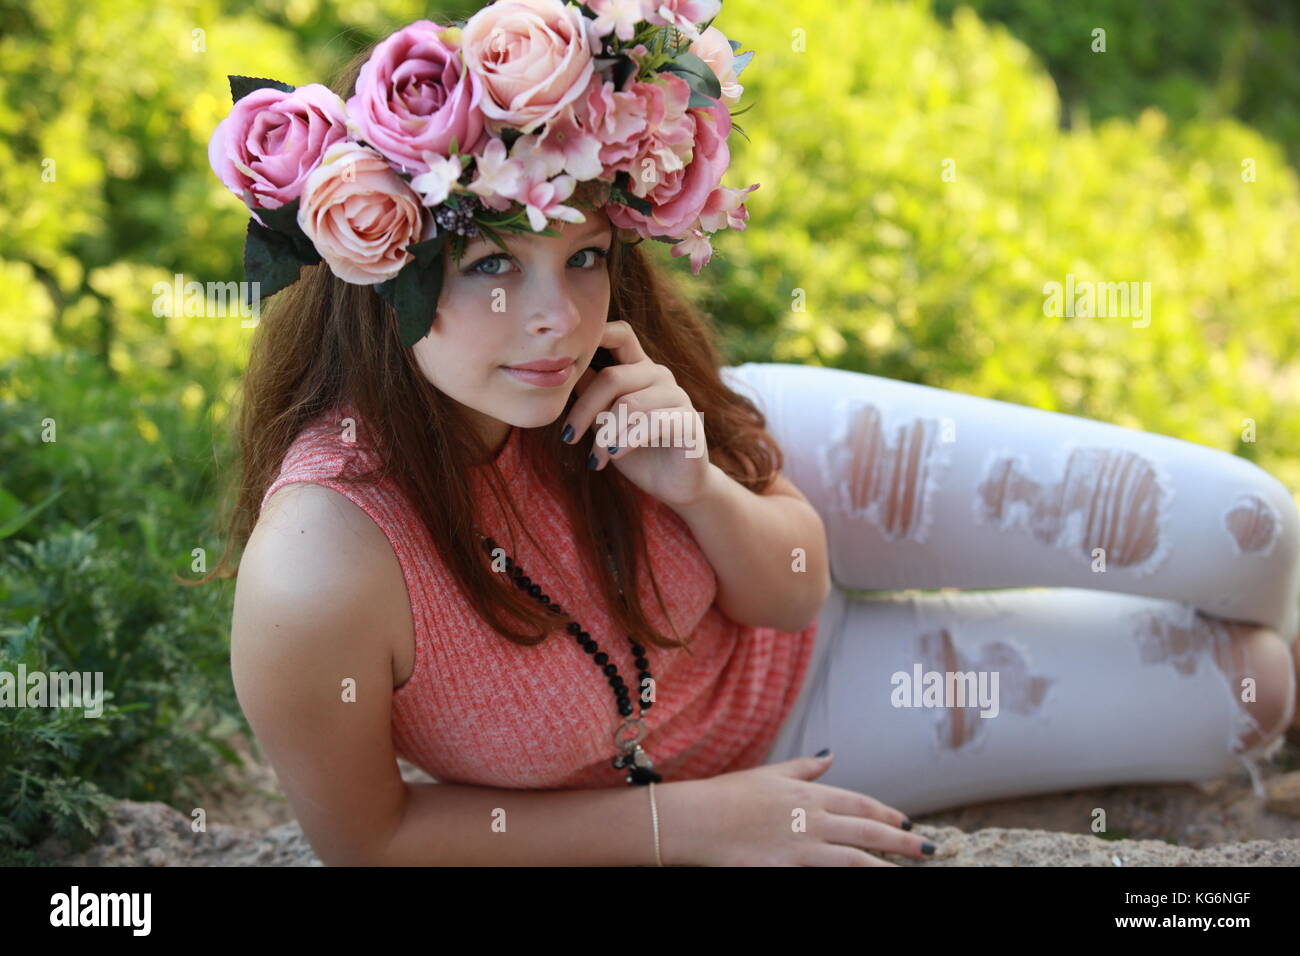 A young beautiful woman in the spring wearing fashionable cloths and a floral crown Stock Photo